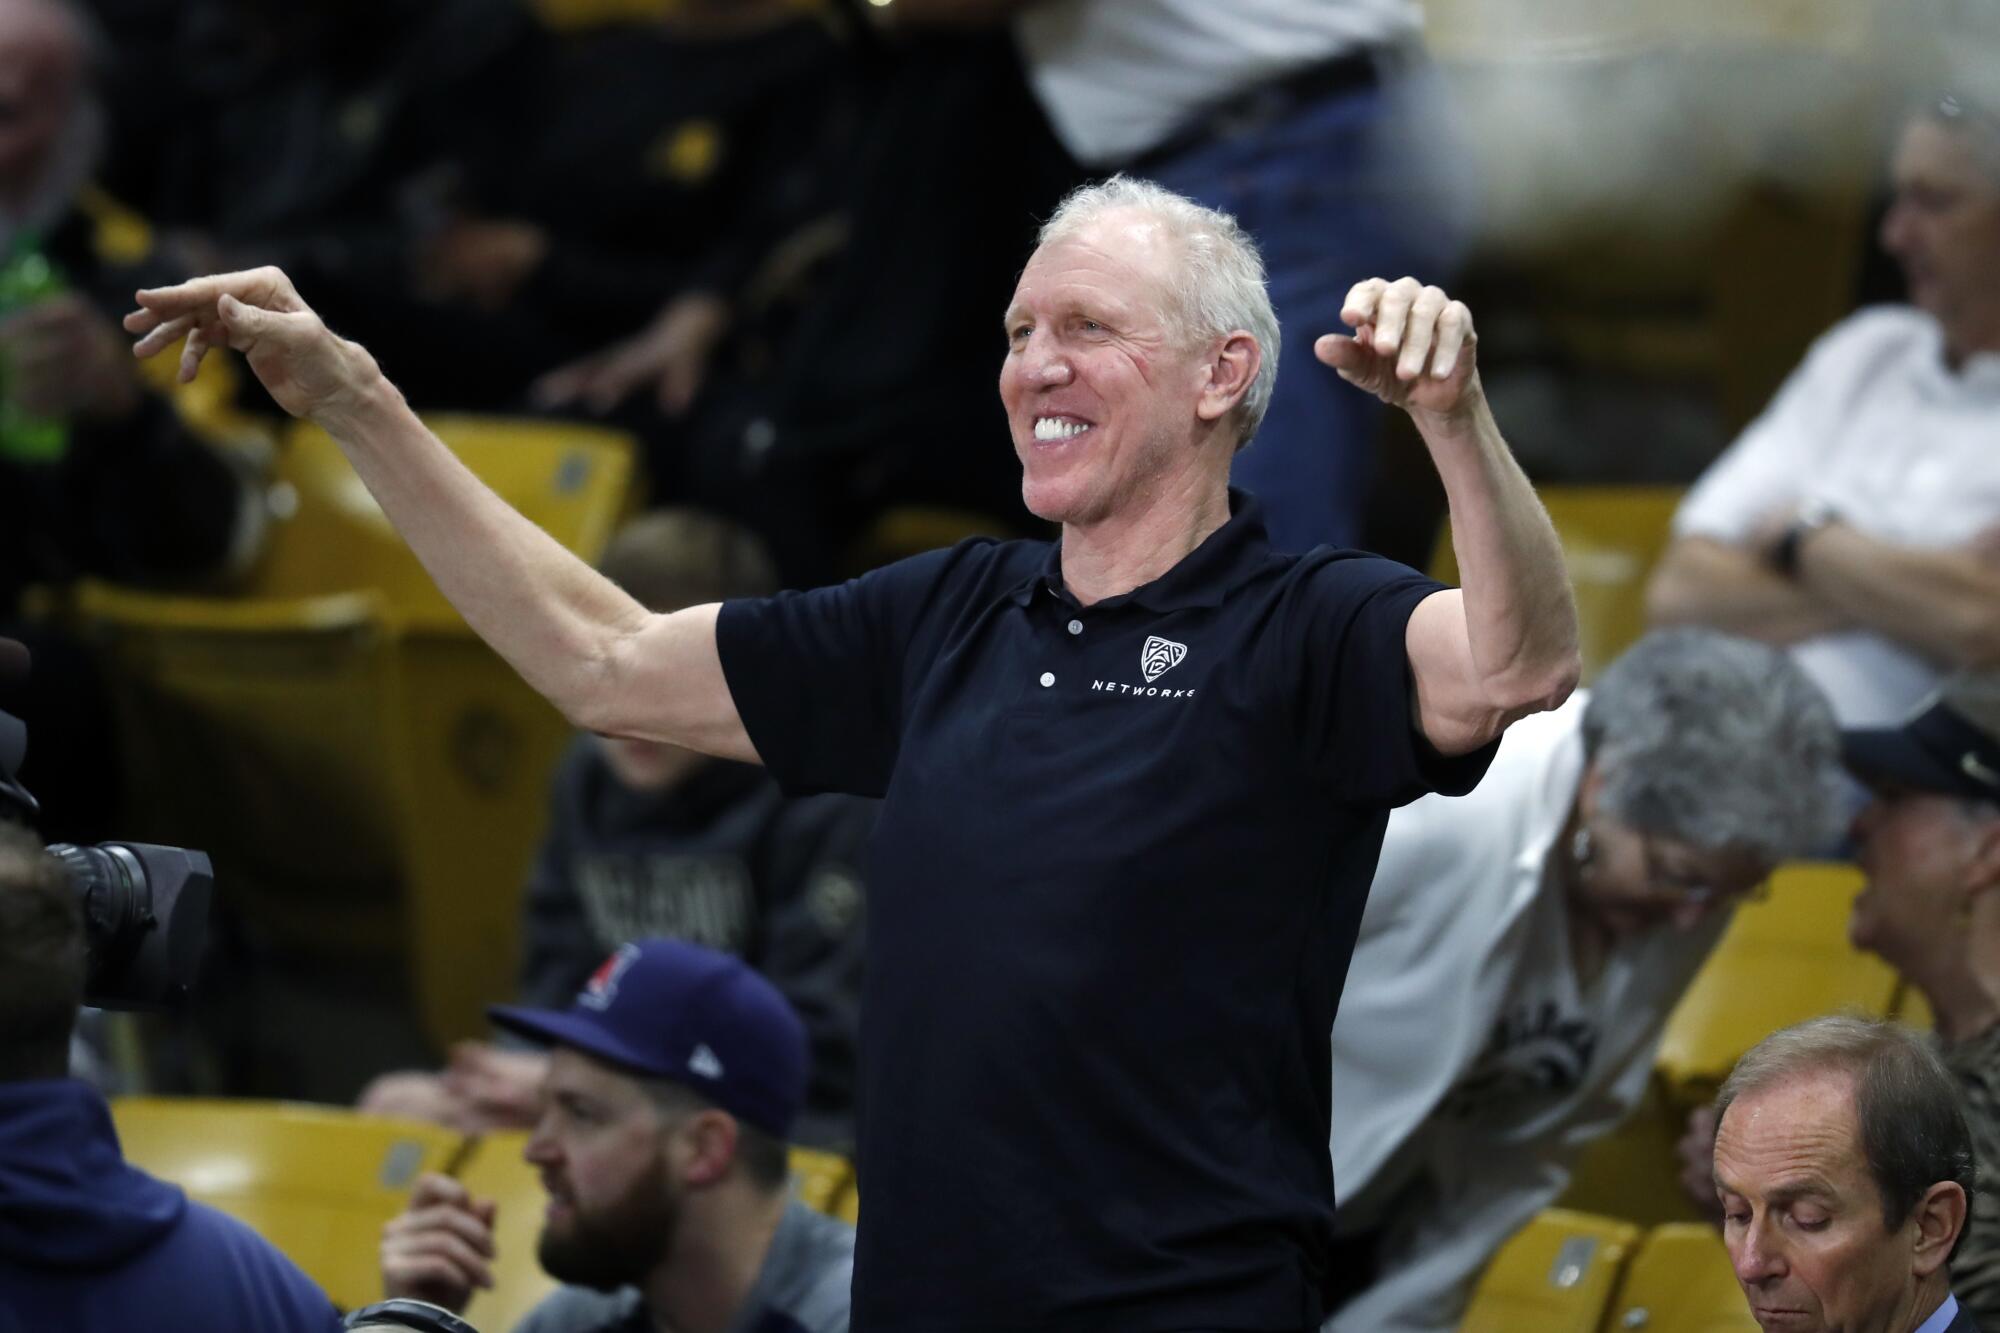 Bill Walton smiles and raises his arms as he acknowledges fans at a Pac-12 basketball game